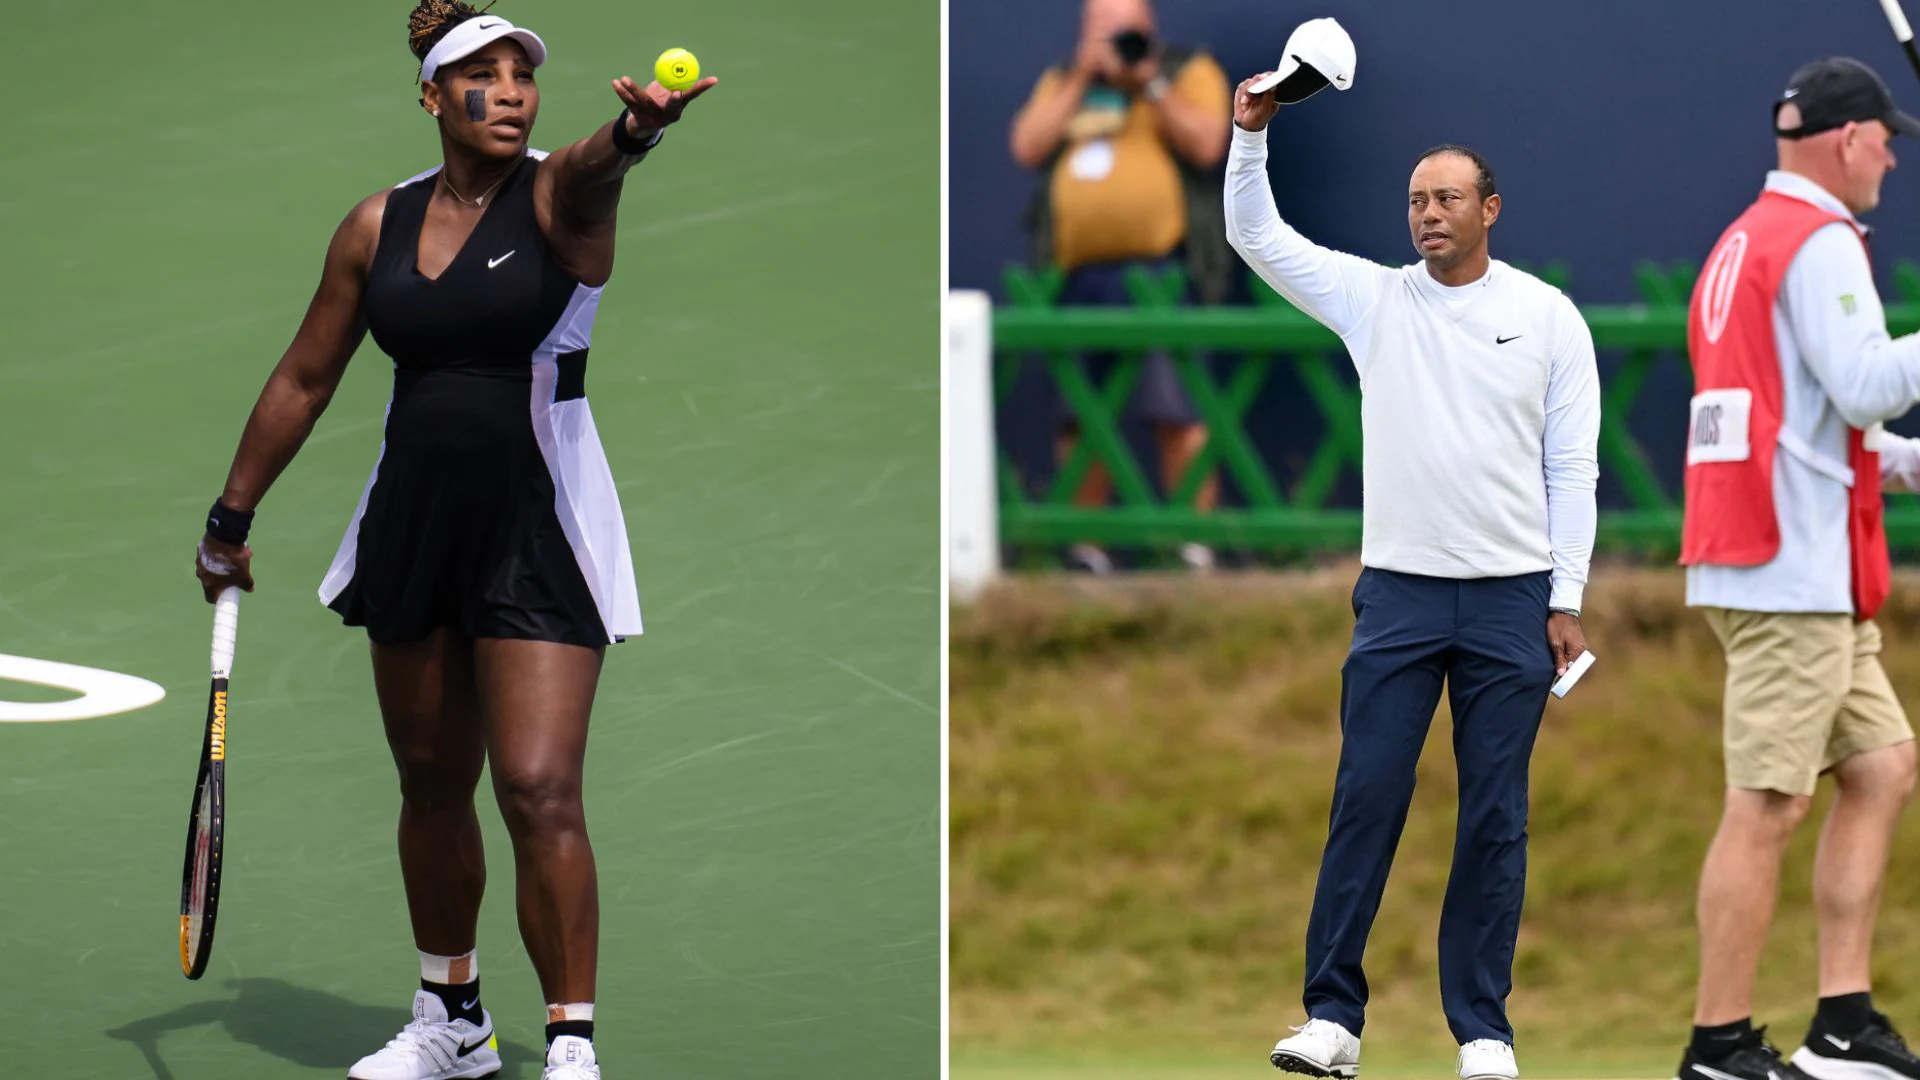 Serena Williams embarking on one last run before retirement thanks to Tiger Woods’ advice